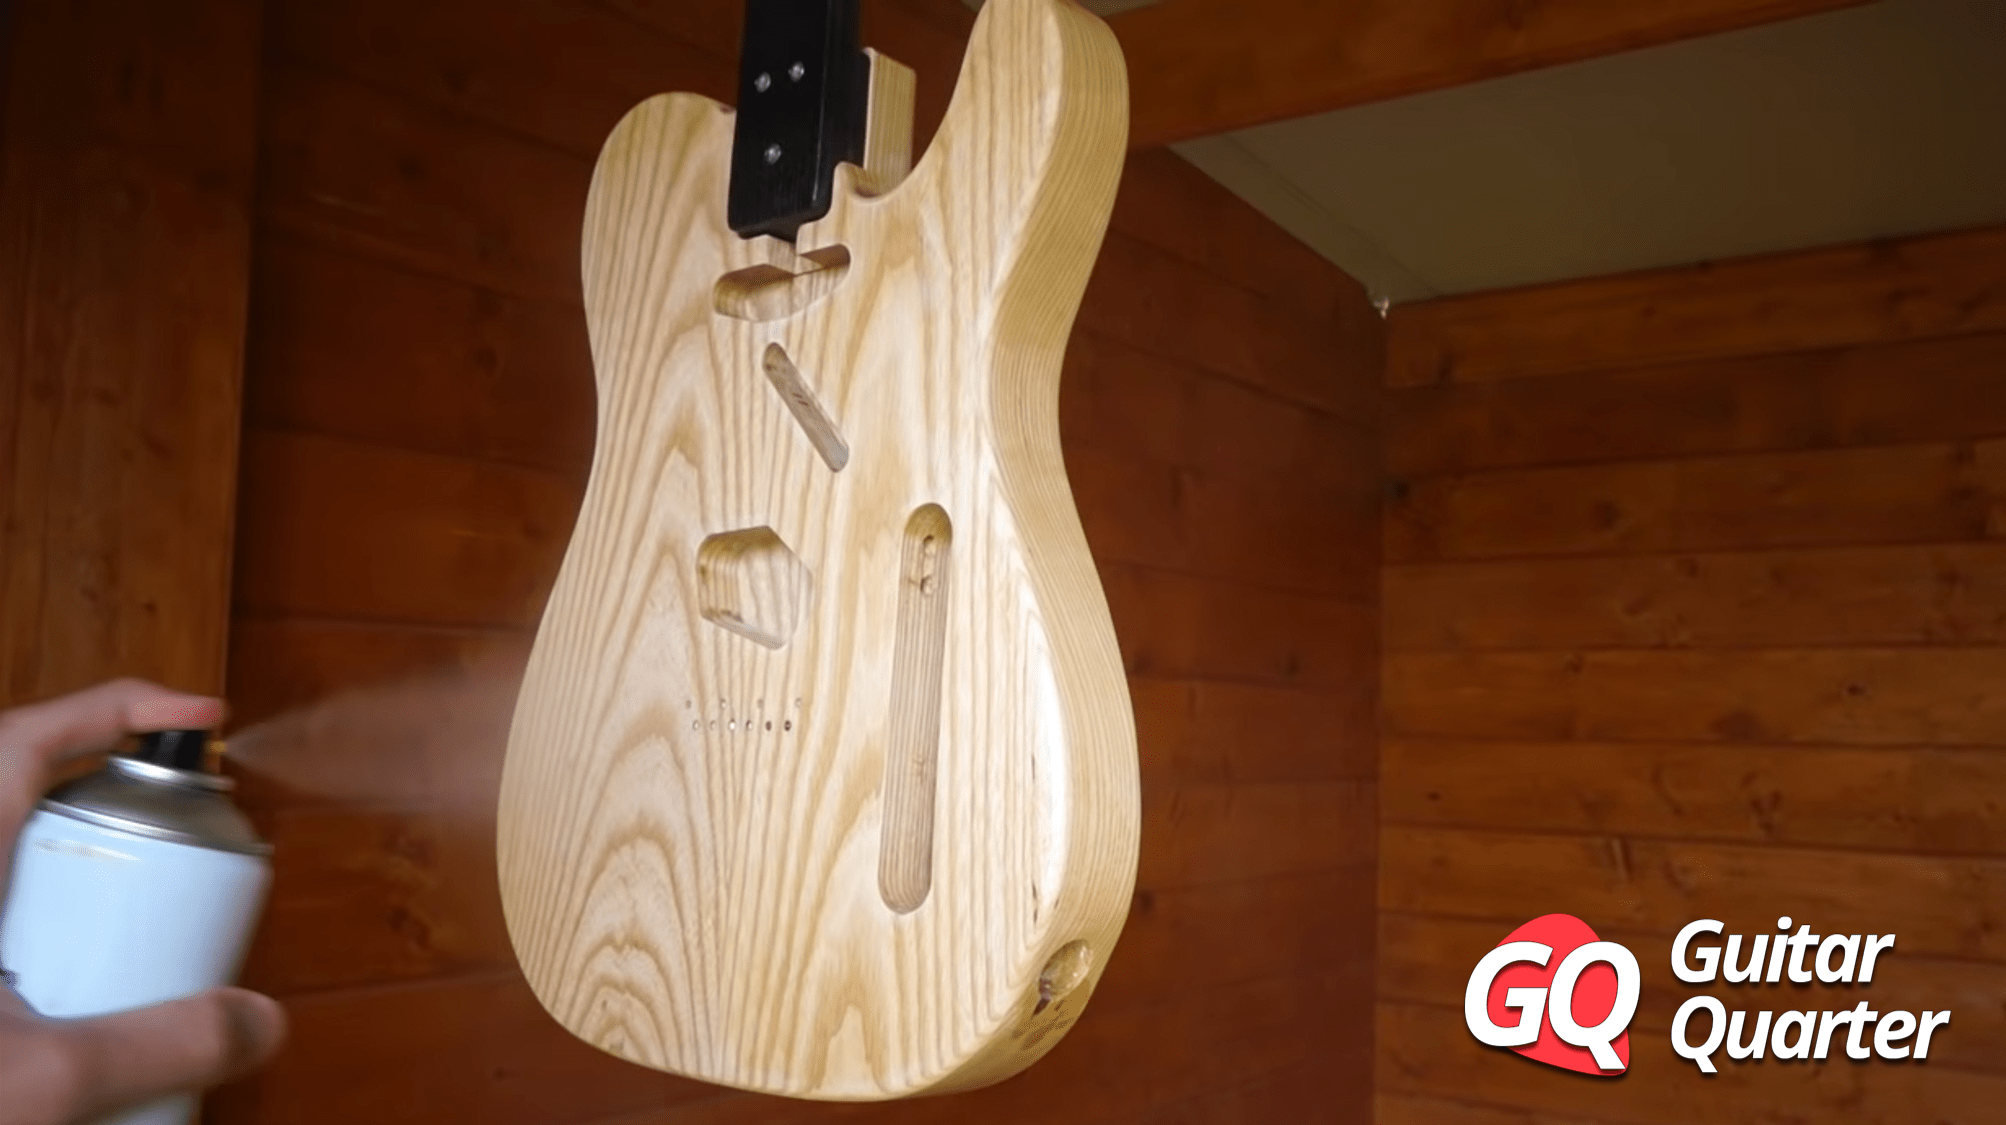 DIY: How to Paint or Refinish Your Guitar With Nitrocellulose